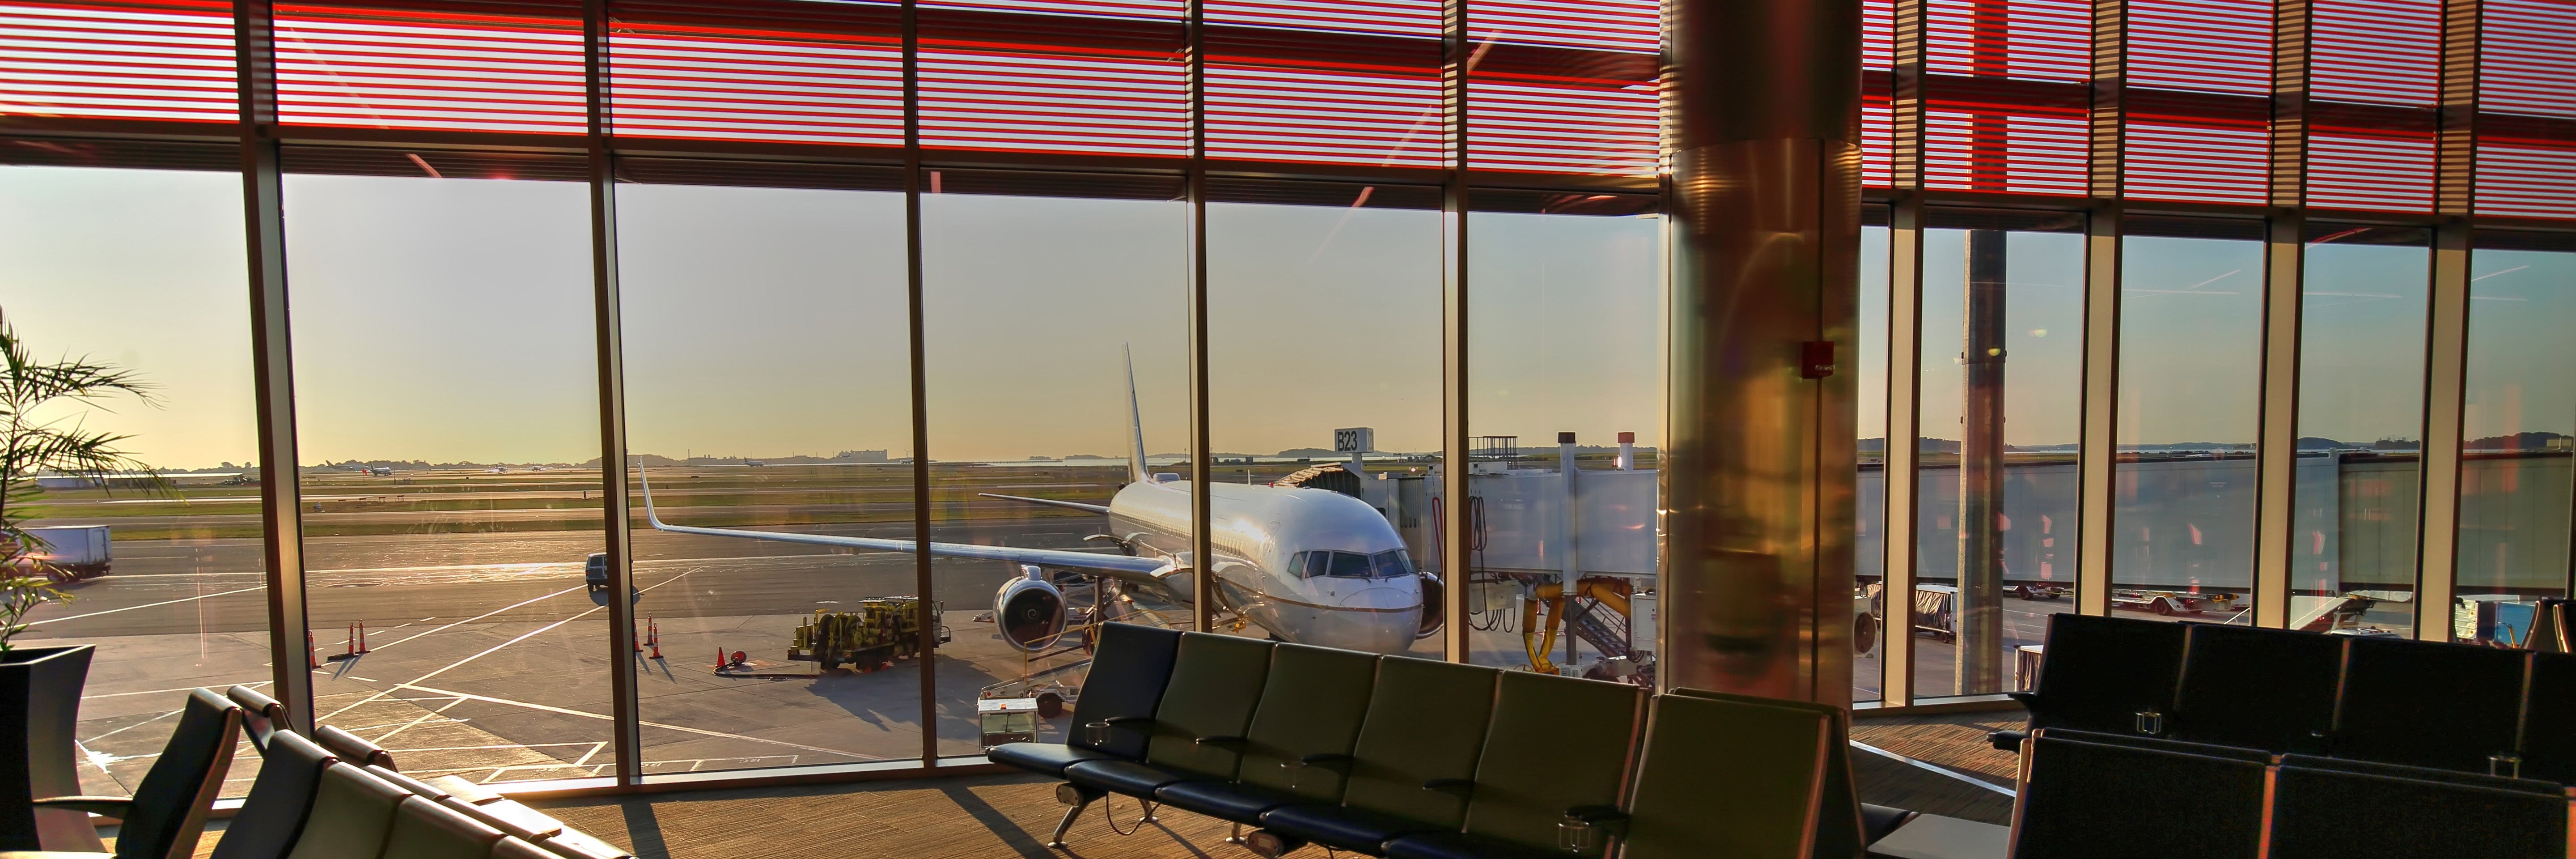 Airport waiting area with Sunrise in background